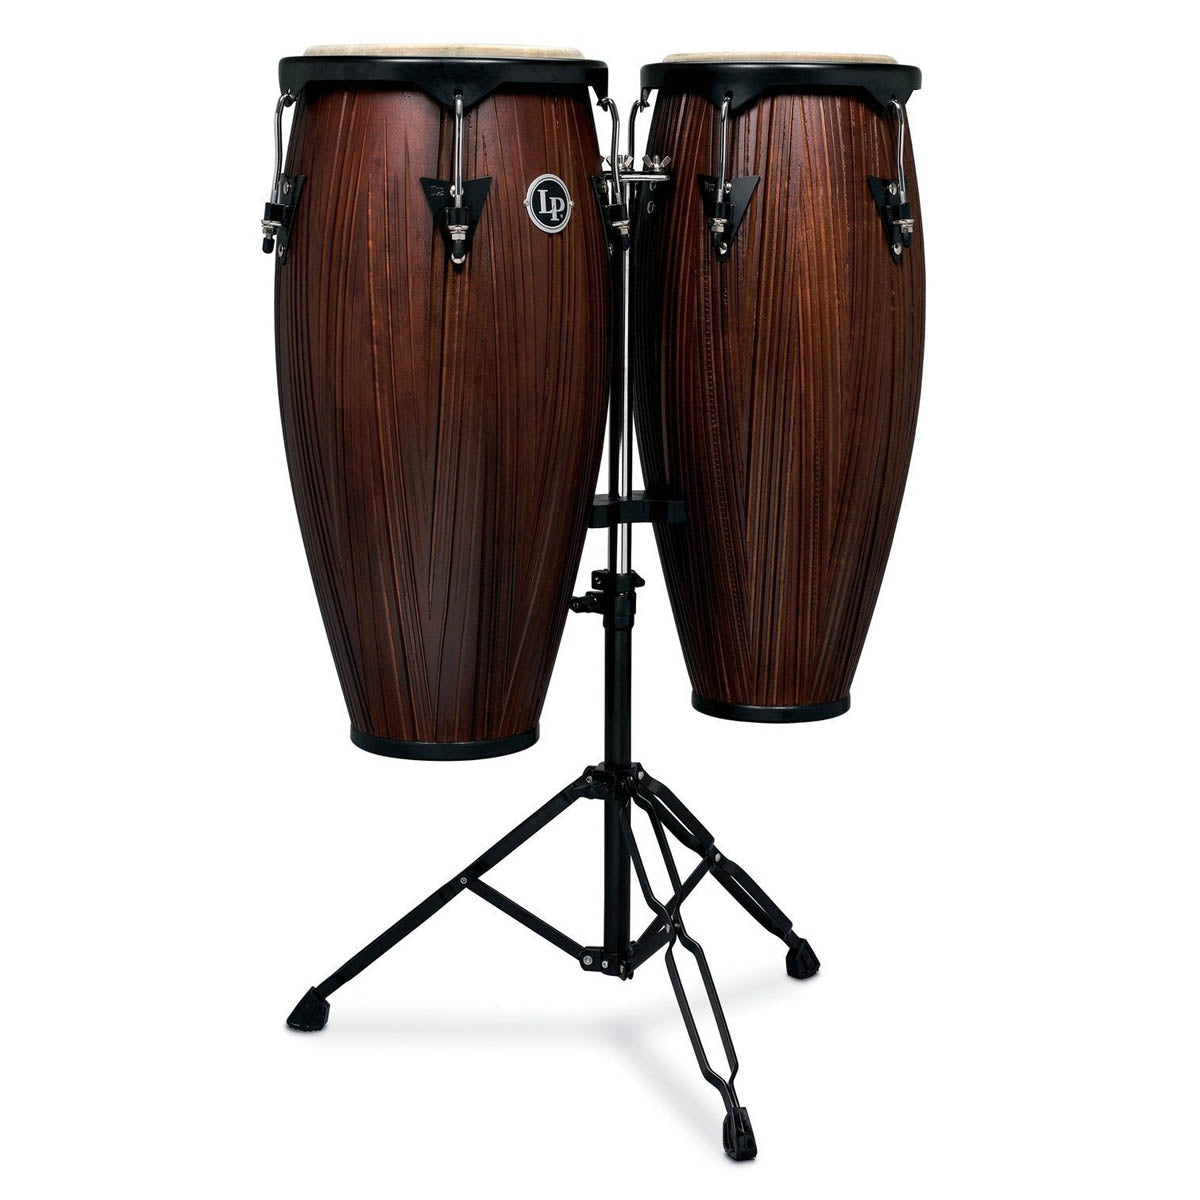 LP Percussion City Series LP646NY 10" & 11" Conga Set in Carved Mango Wood